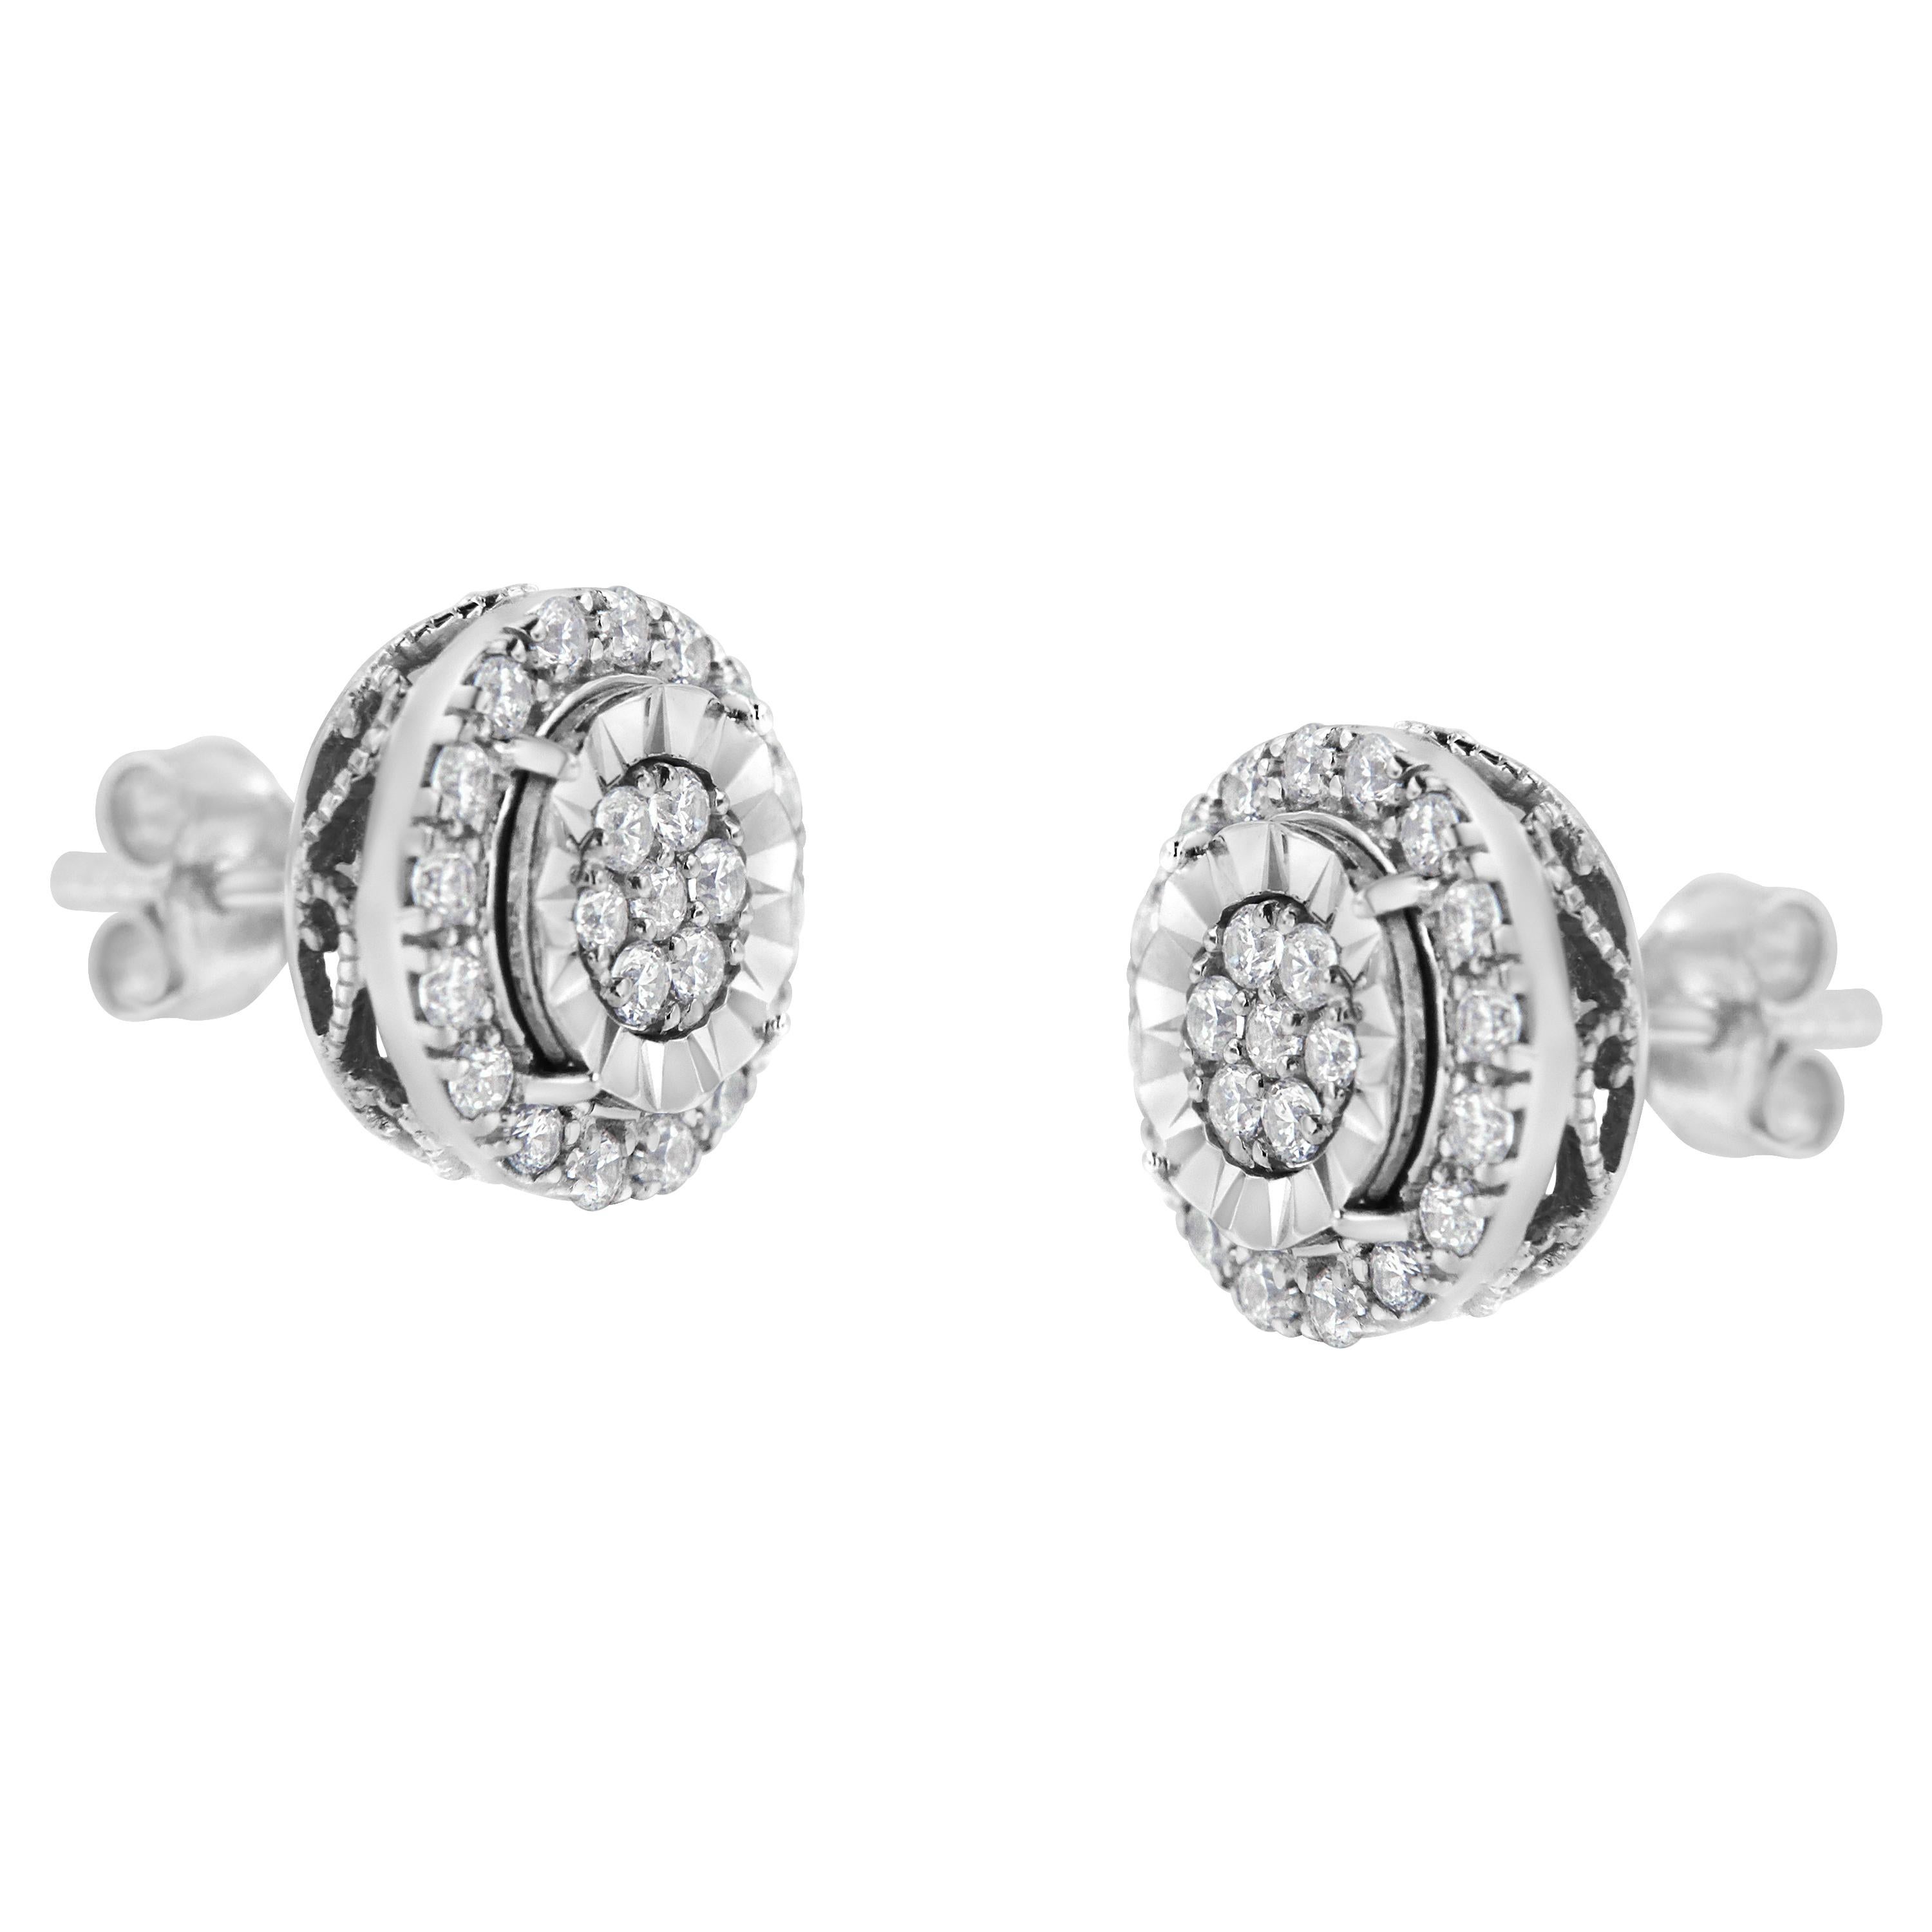 Round Cut .925 Sterling Silver 1.0 Carat Diamond Cluster Earrings For Sale